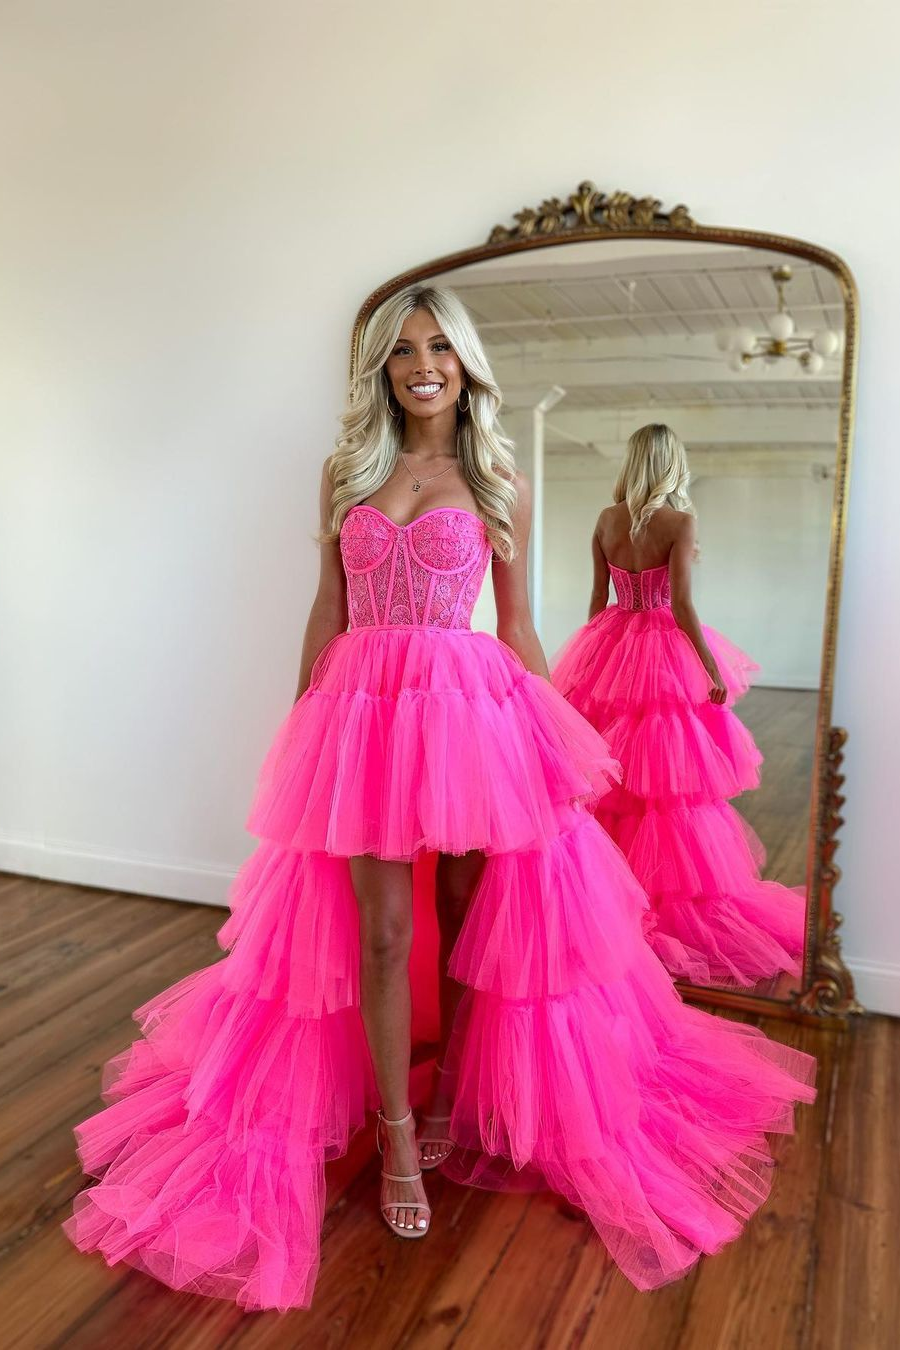 Beautiful Rose Prom Dress With Sleeveless Gown Tulle Train YL0113